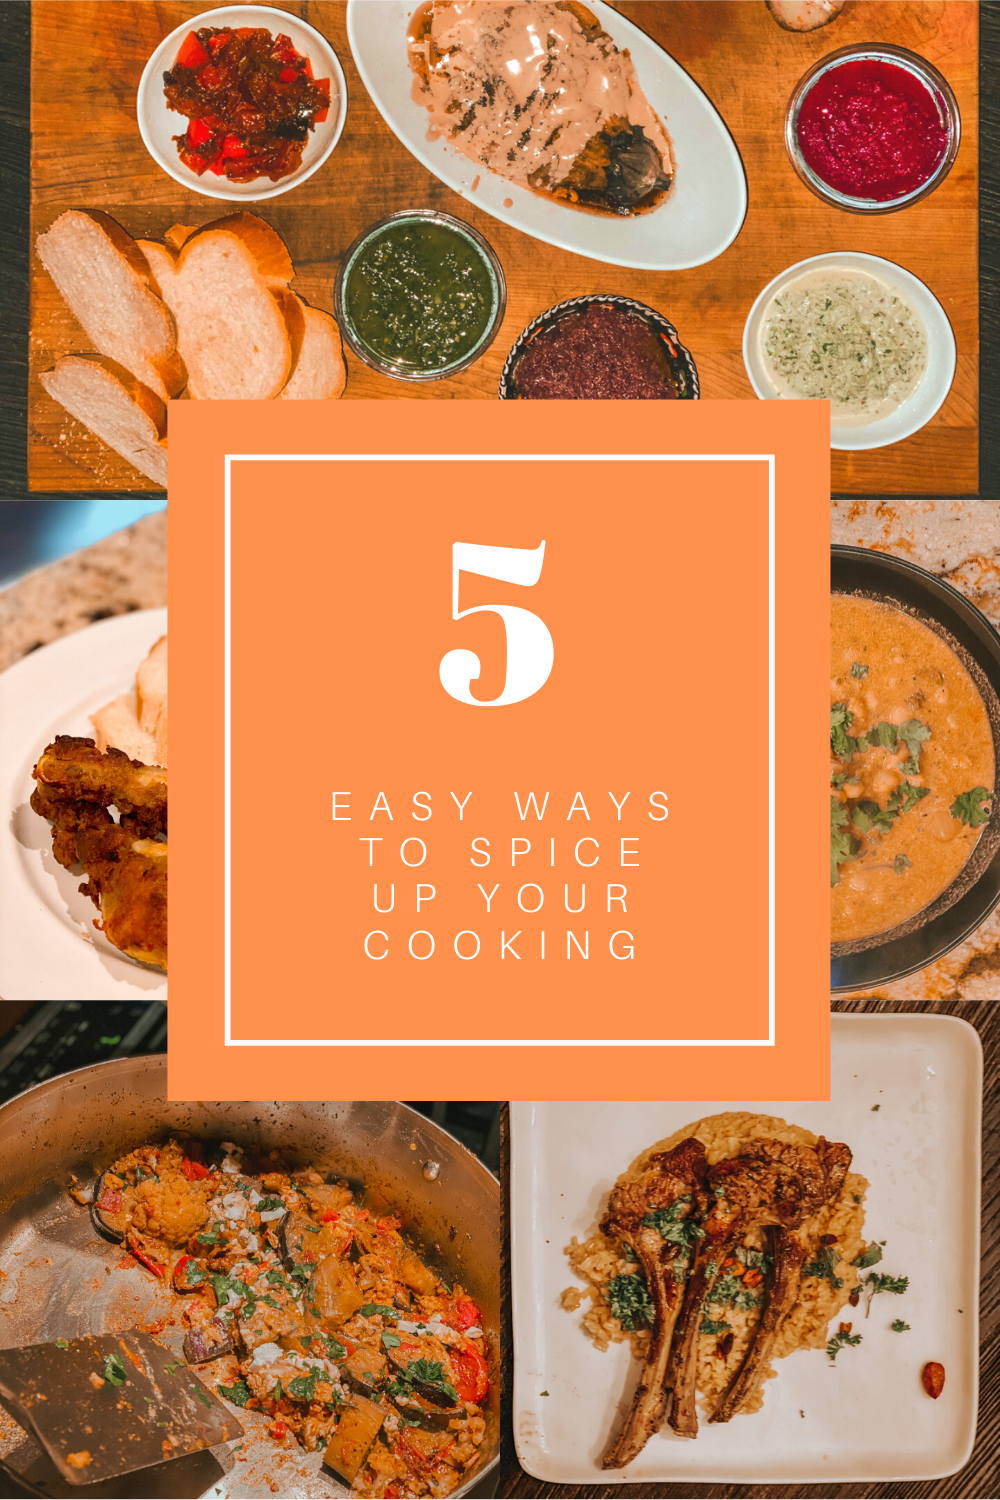 5 Easy Ways to Spice Up Your Cooking